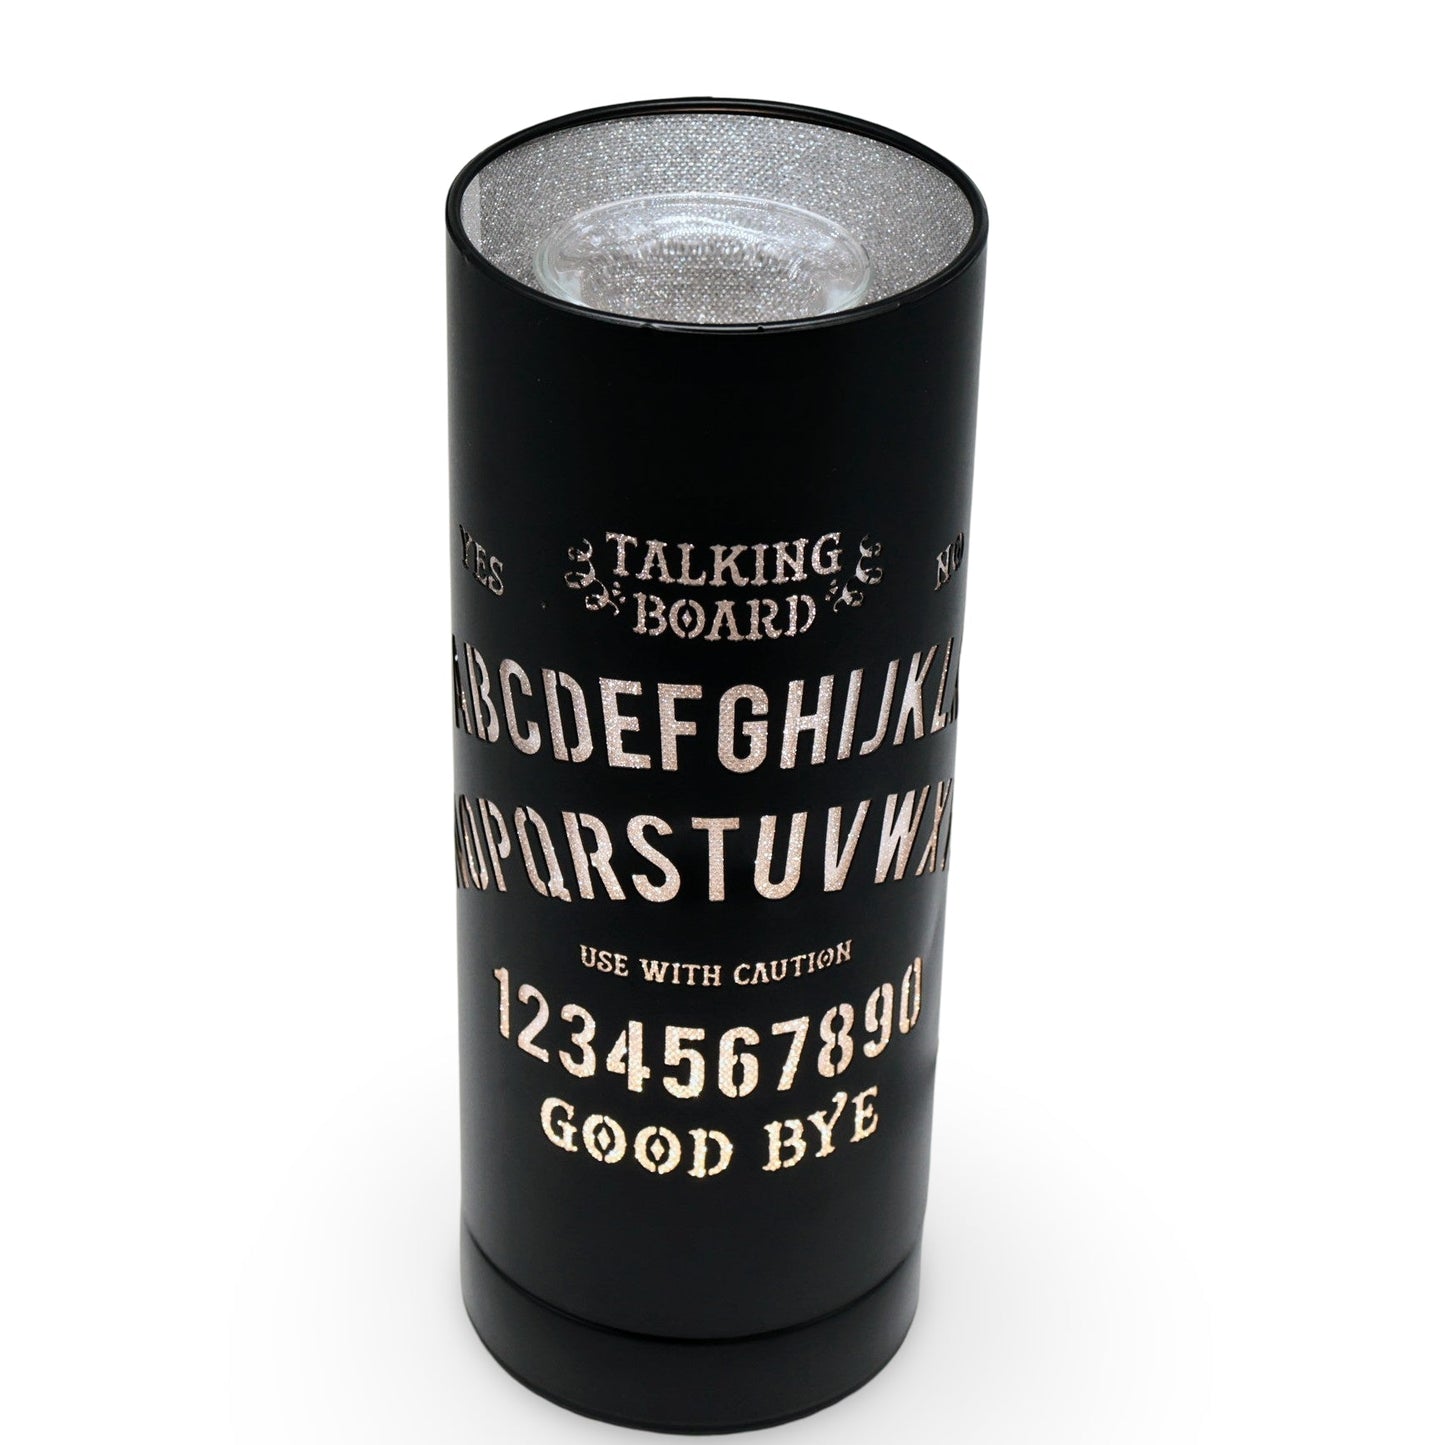 Electric oil and wax cube burner with Black Ouija Talking Board design, creating a spooky atmosphere as an aroma lamp.